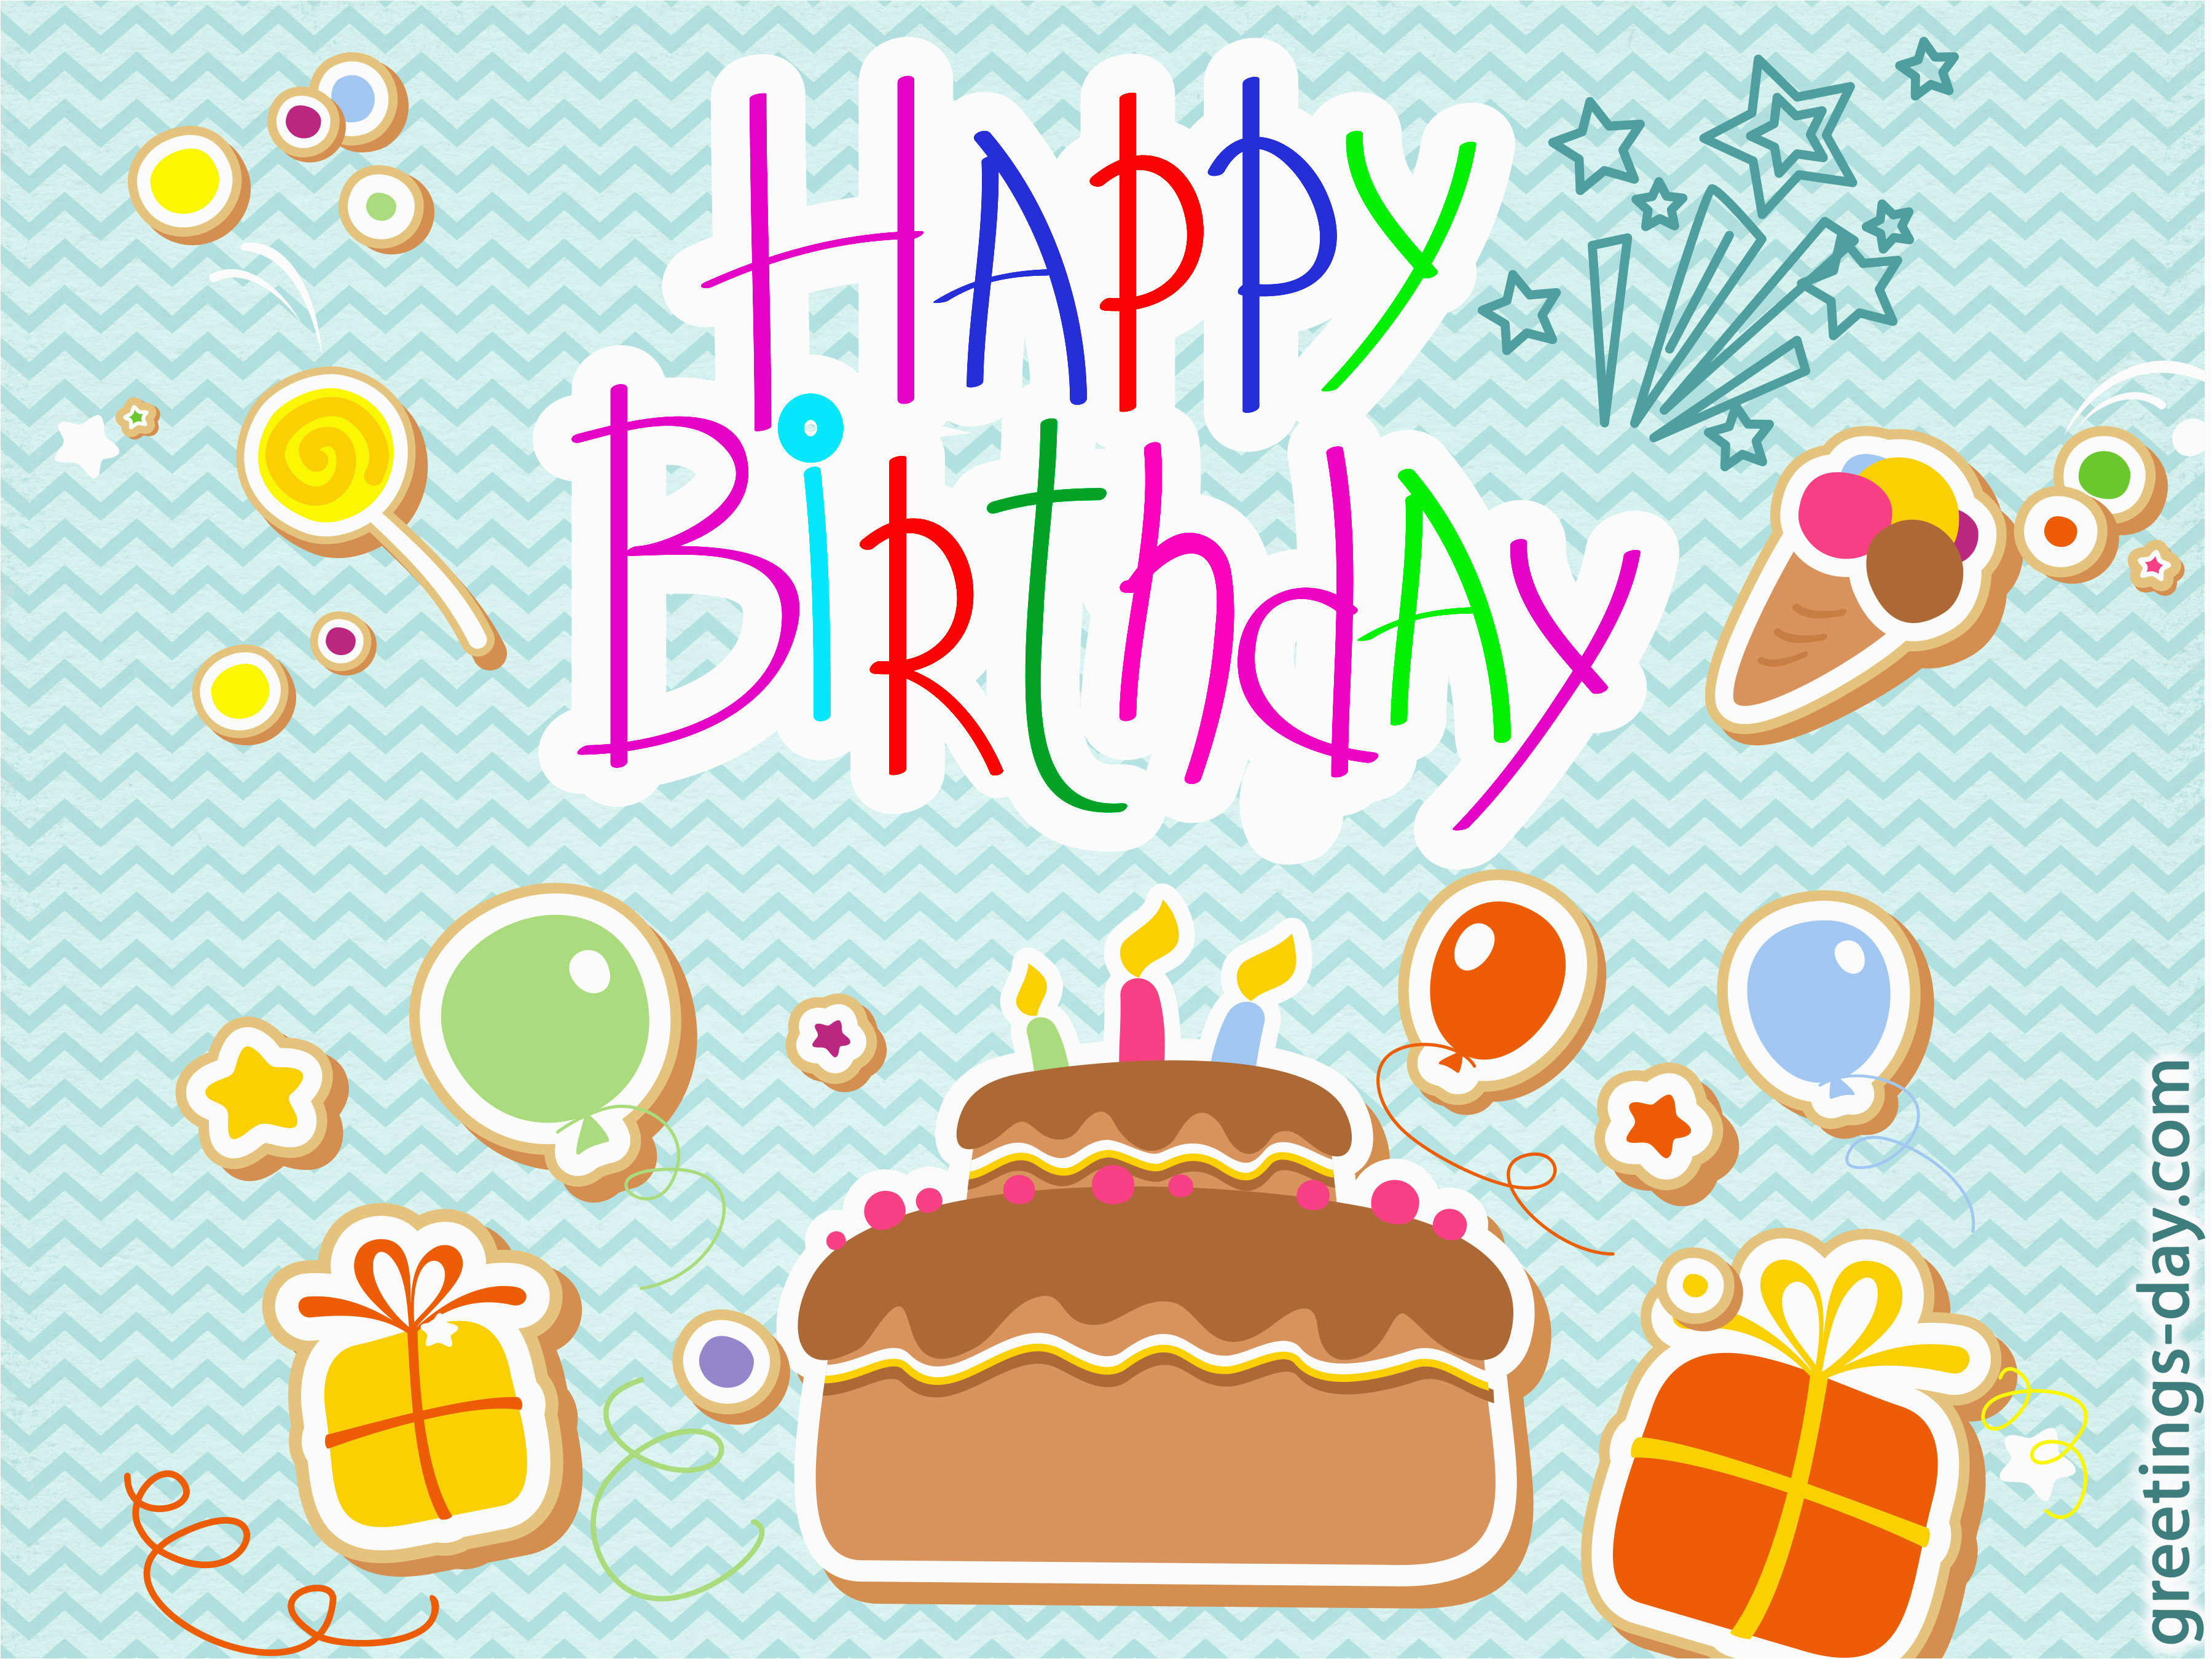 happy birthday greeting cards share image to you friend